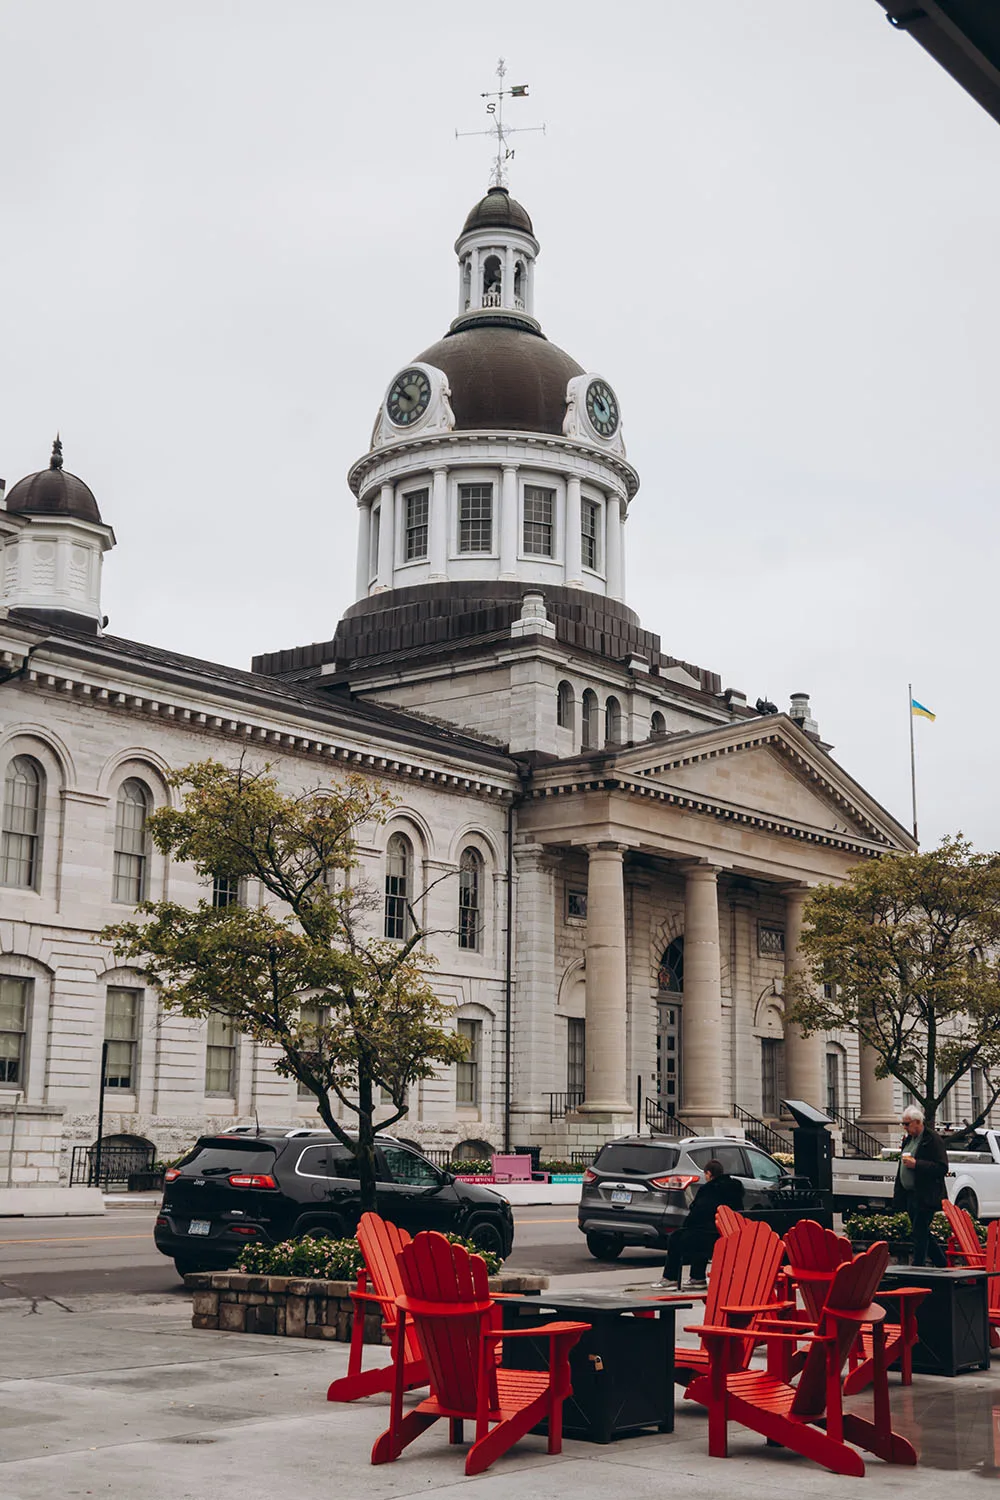 Planning a trip to Kingston, Ontario soon? This guide to the best things to do in Kingston is for you! From the top Kingston activities and attractions, to the must see sights, best restaurants, bars, and everything in between. You won’t want to miss this guide that will help you plan your perfect Kingston getaway. Pictured here: Visit Kingston's City Hall